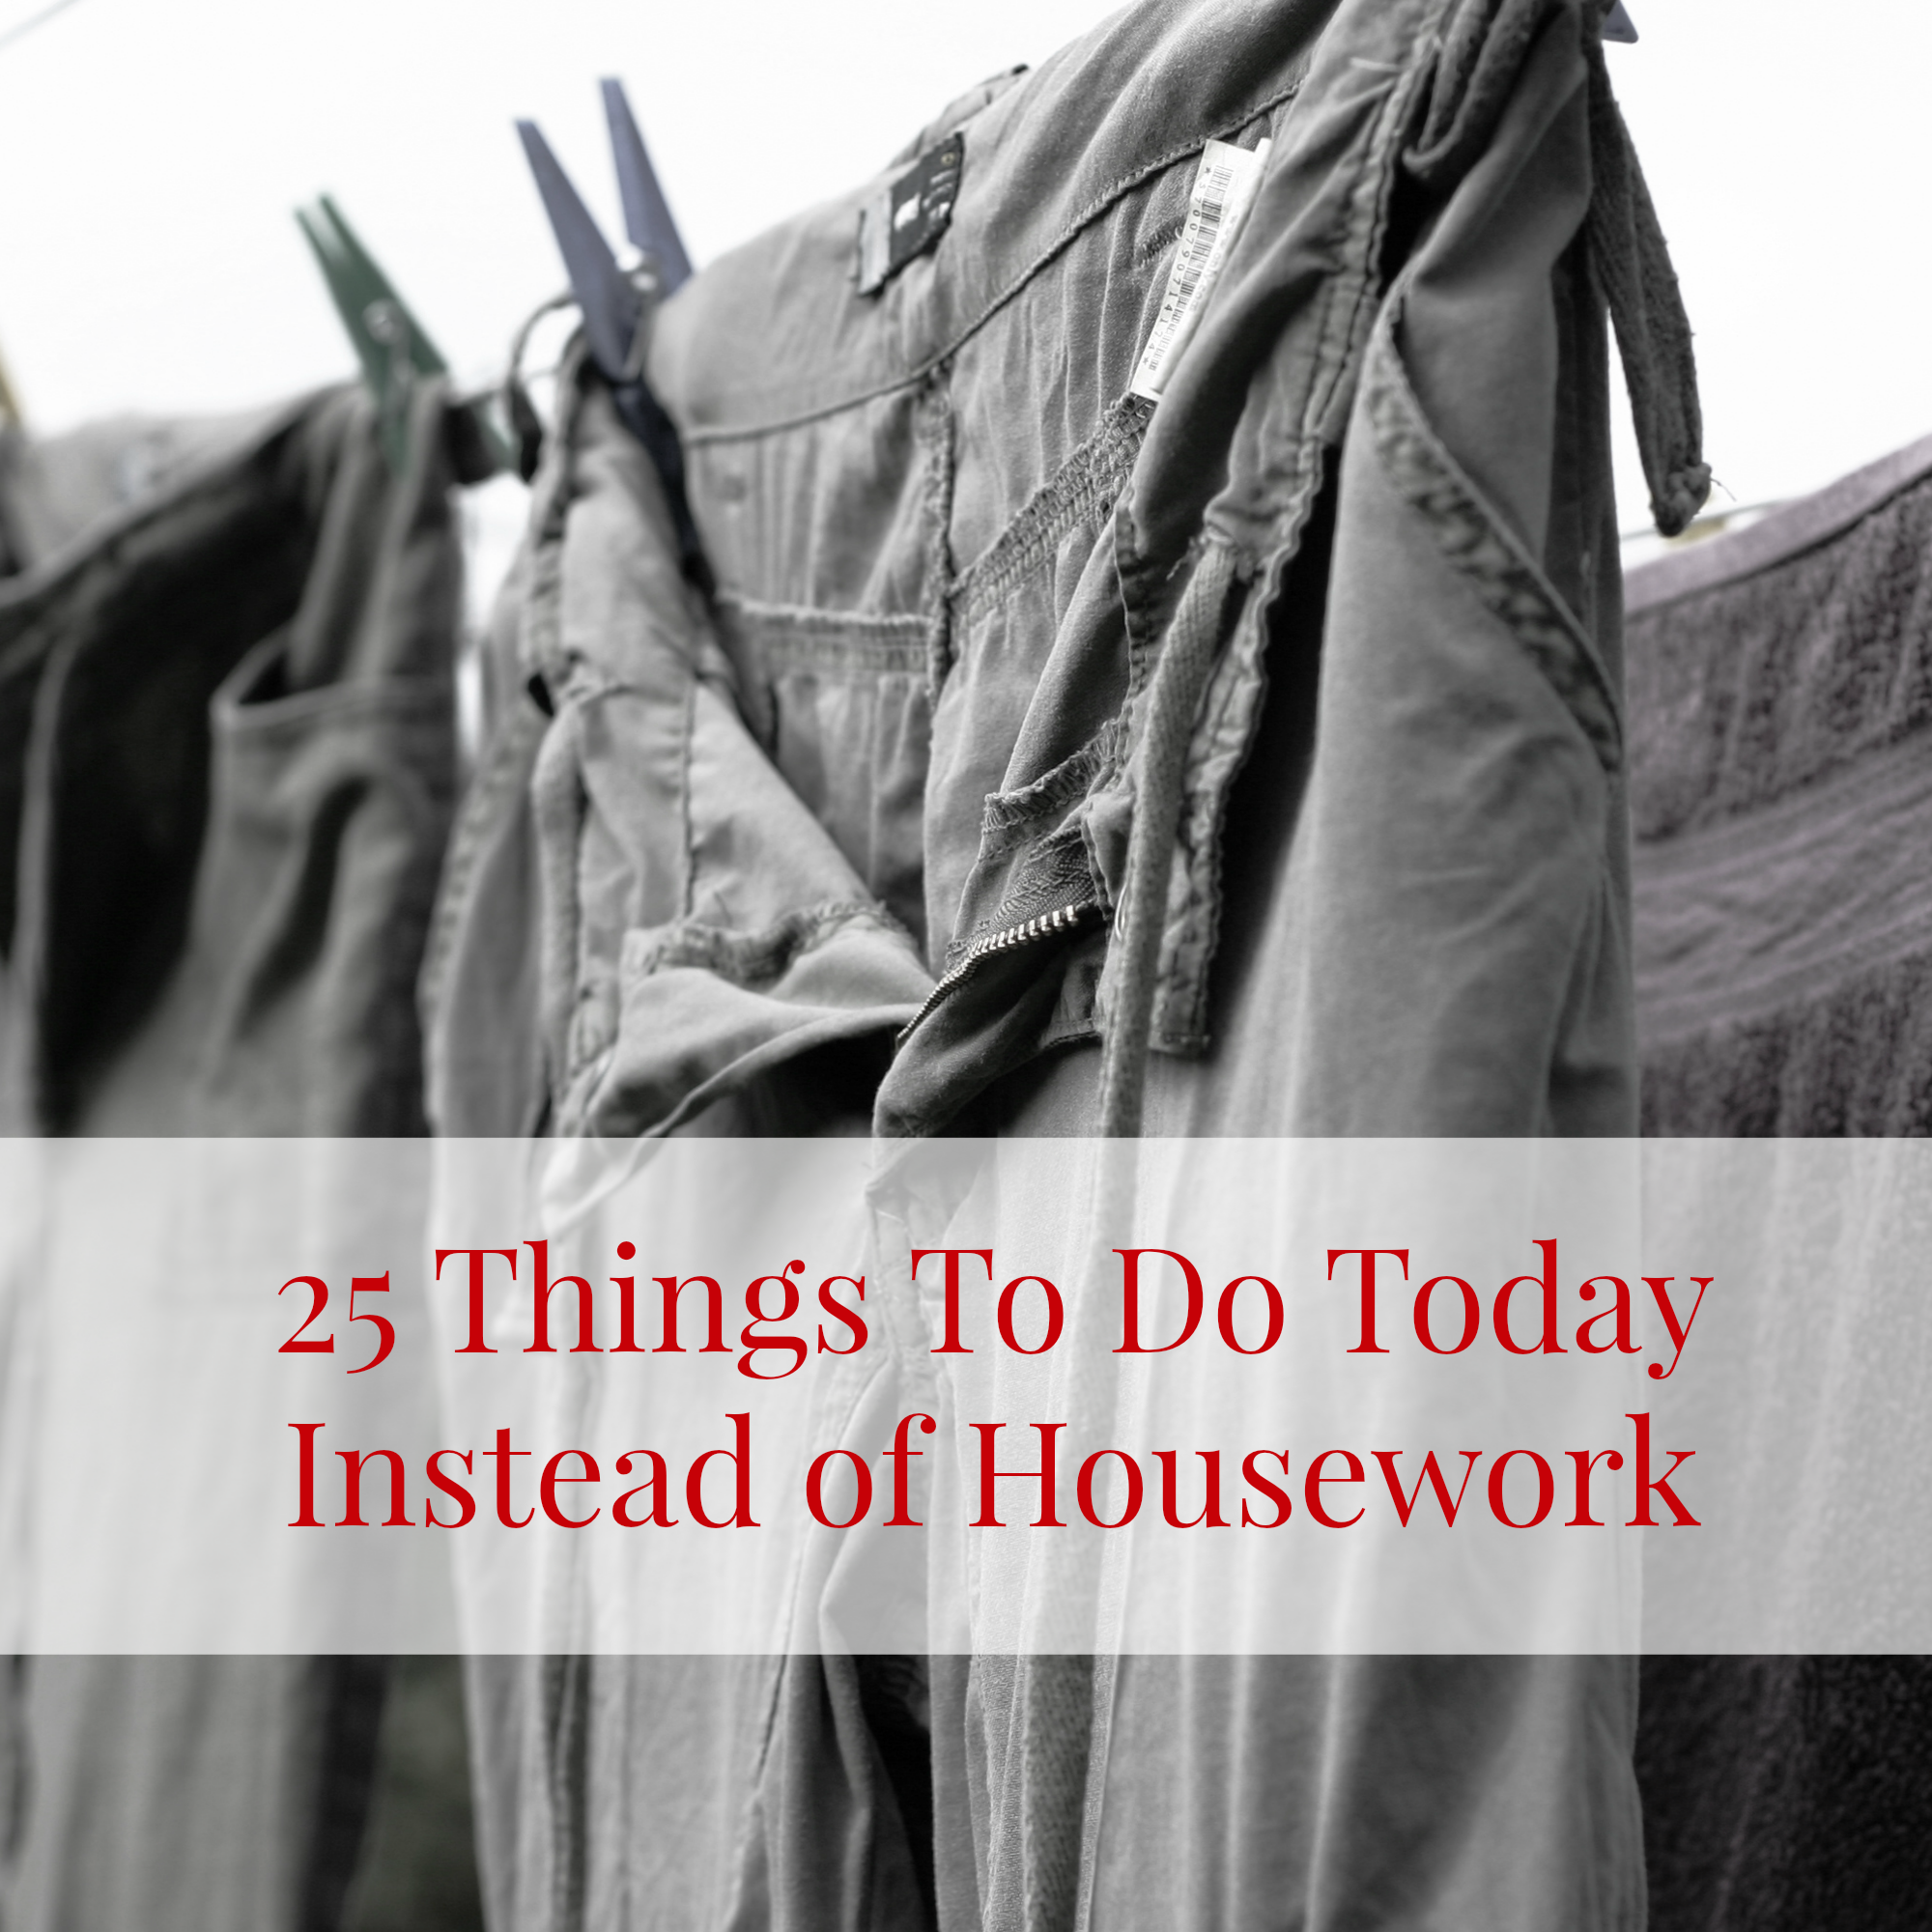 25 Things To Do Today Instead of Housework